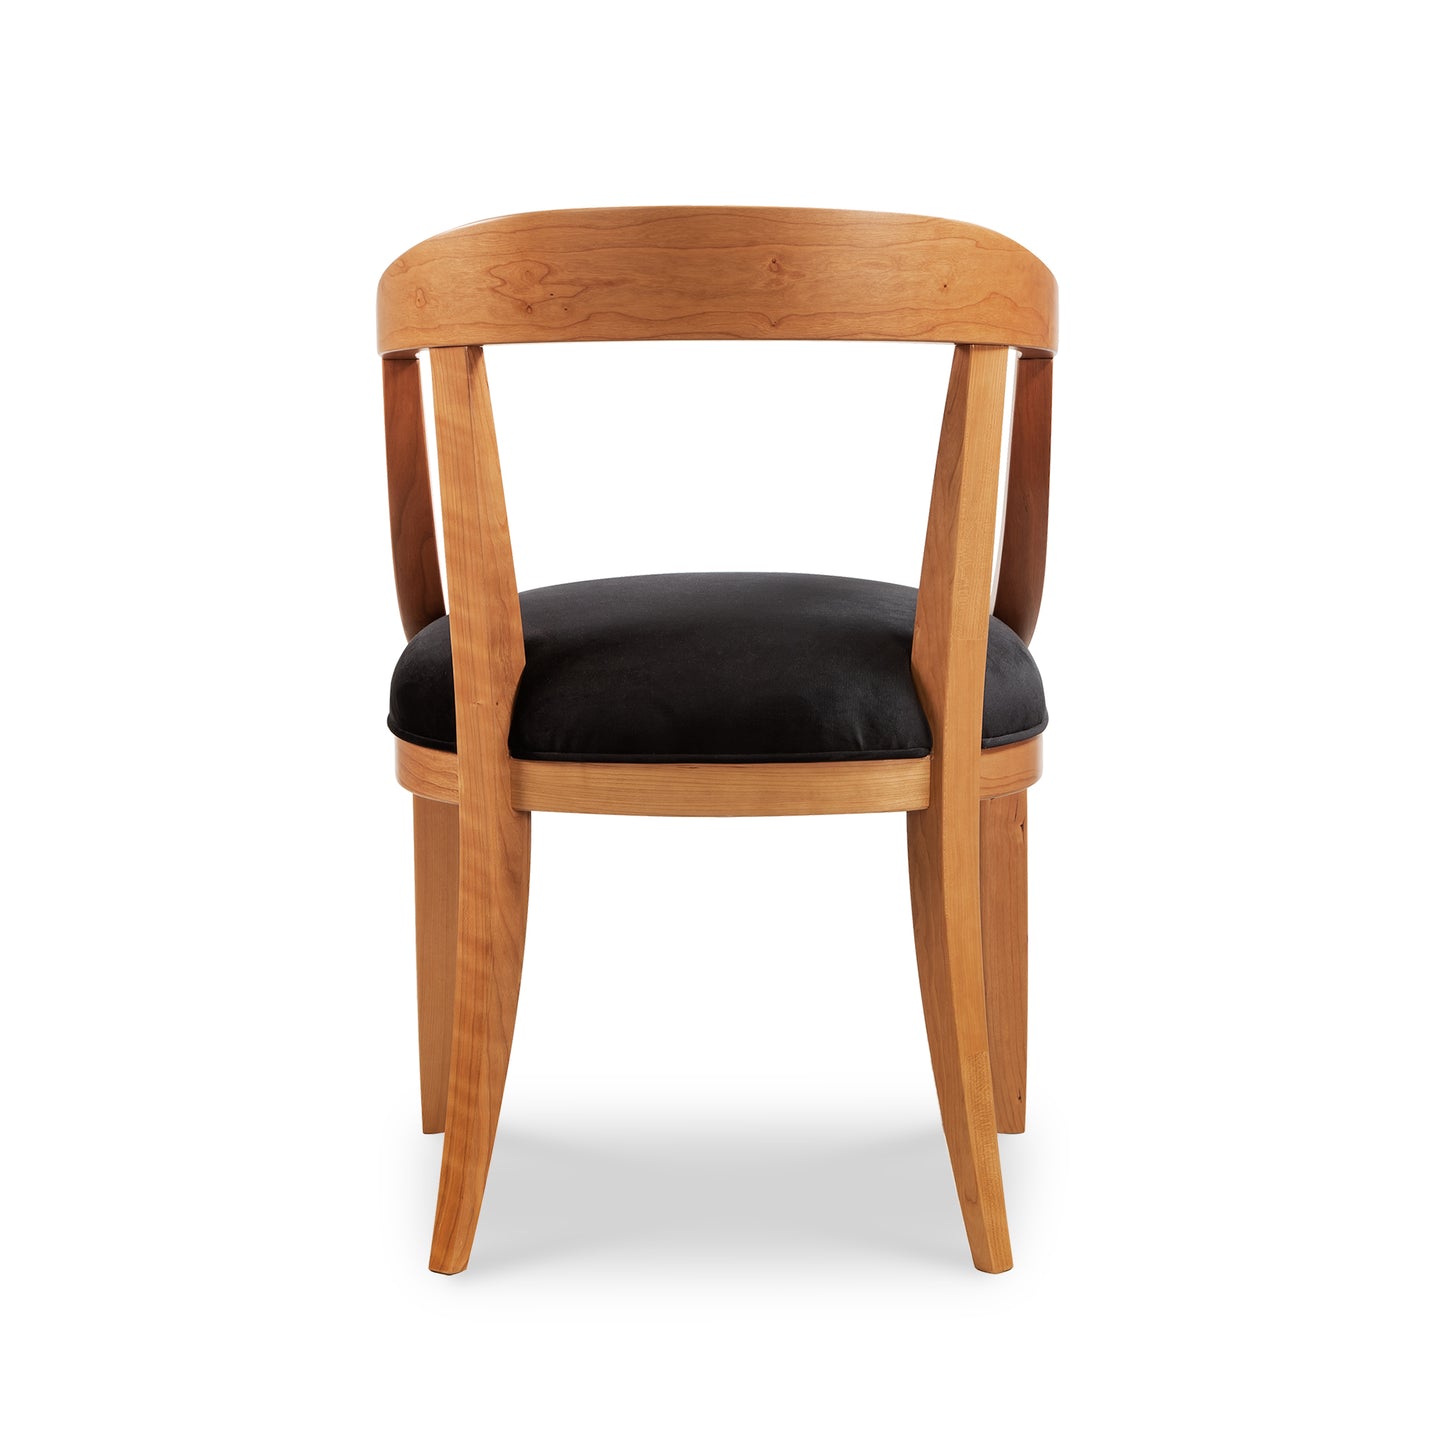 A wooden chair with black upholstered seat.